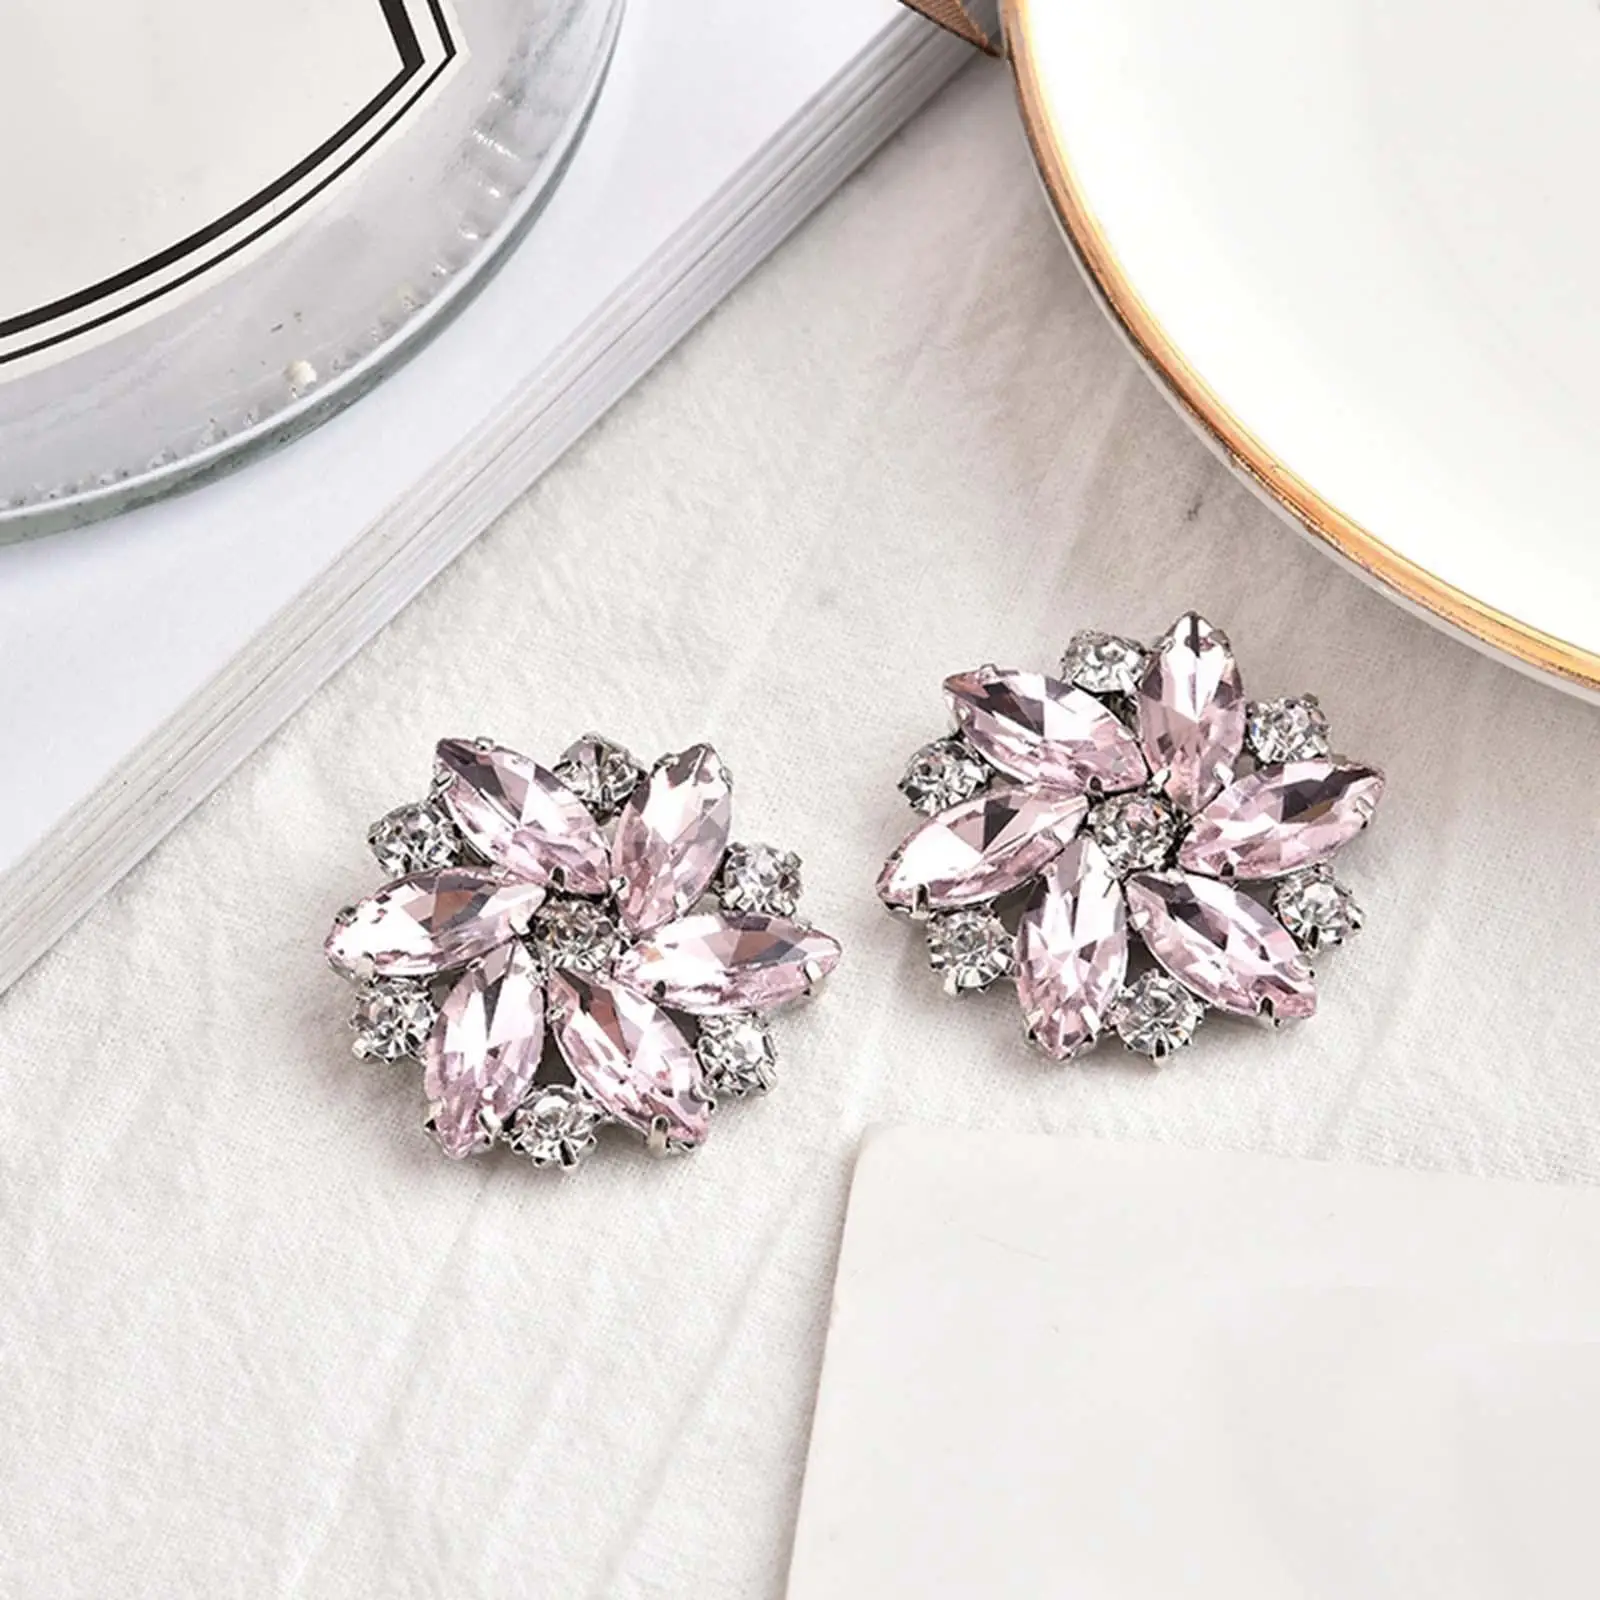 2x Rhinestone Shoe Clips Shoes Jewelry Decoration Wedding Crystal Shoe Buckle for Clothing Sandals Bakcpack Hair Accessories